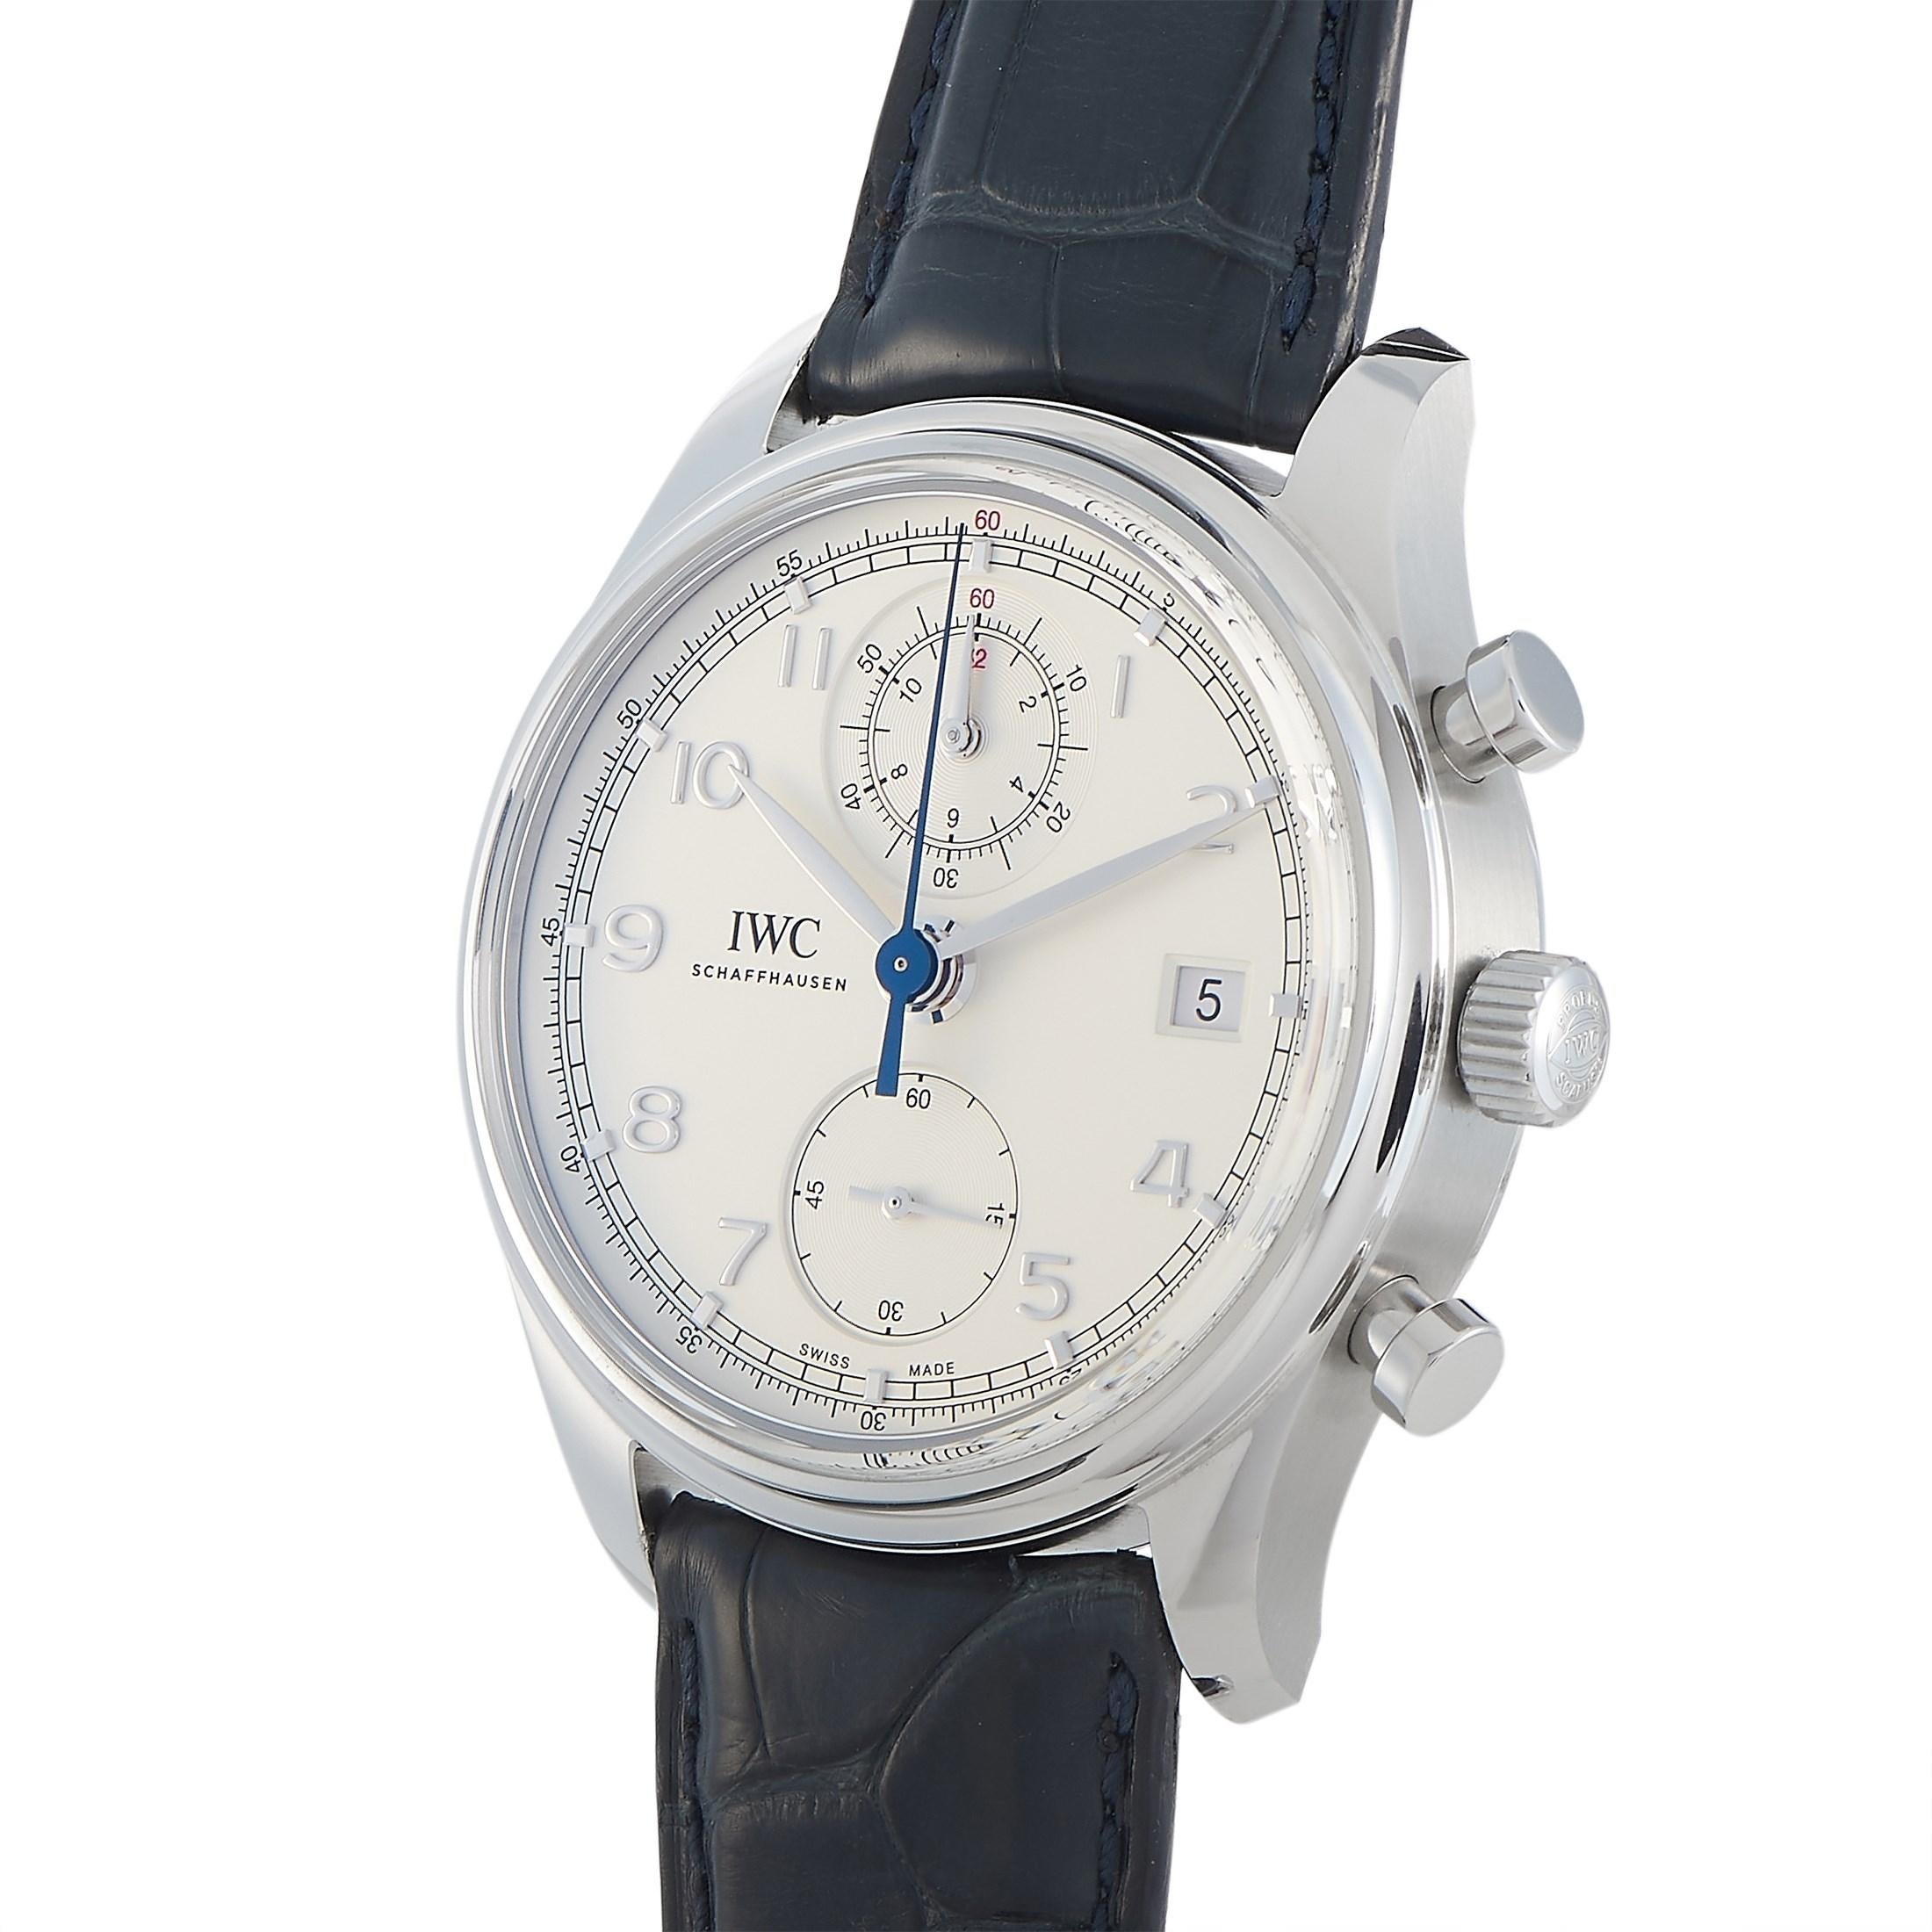 A dress watch with a sportier twist, the IWC Portugieser Chronograph Men's Watch 390403 hits all the details as expected. This is a beautiful watch with a stainless steel case, a scratch-resistant arched-edge sapphire glass, see-through sapphire